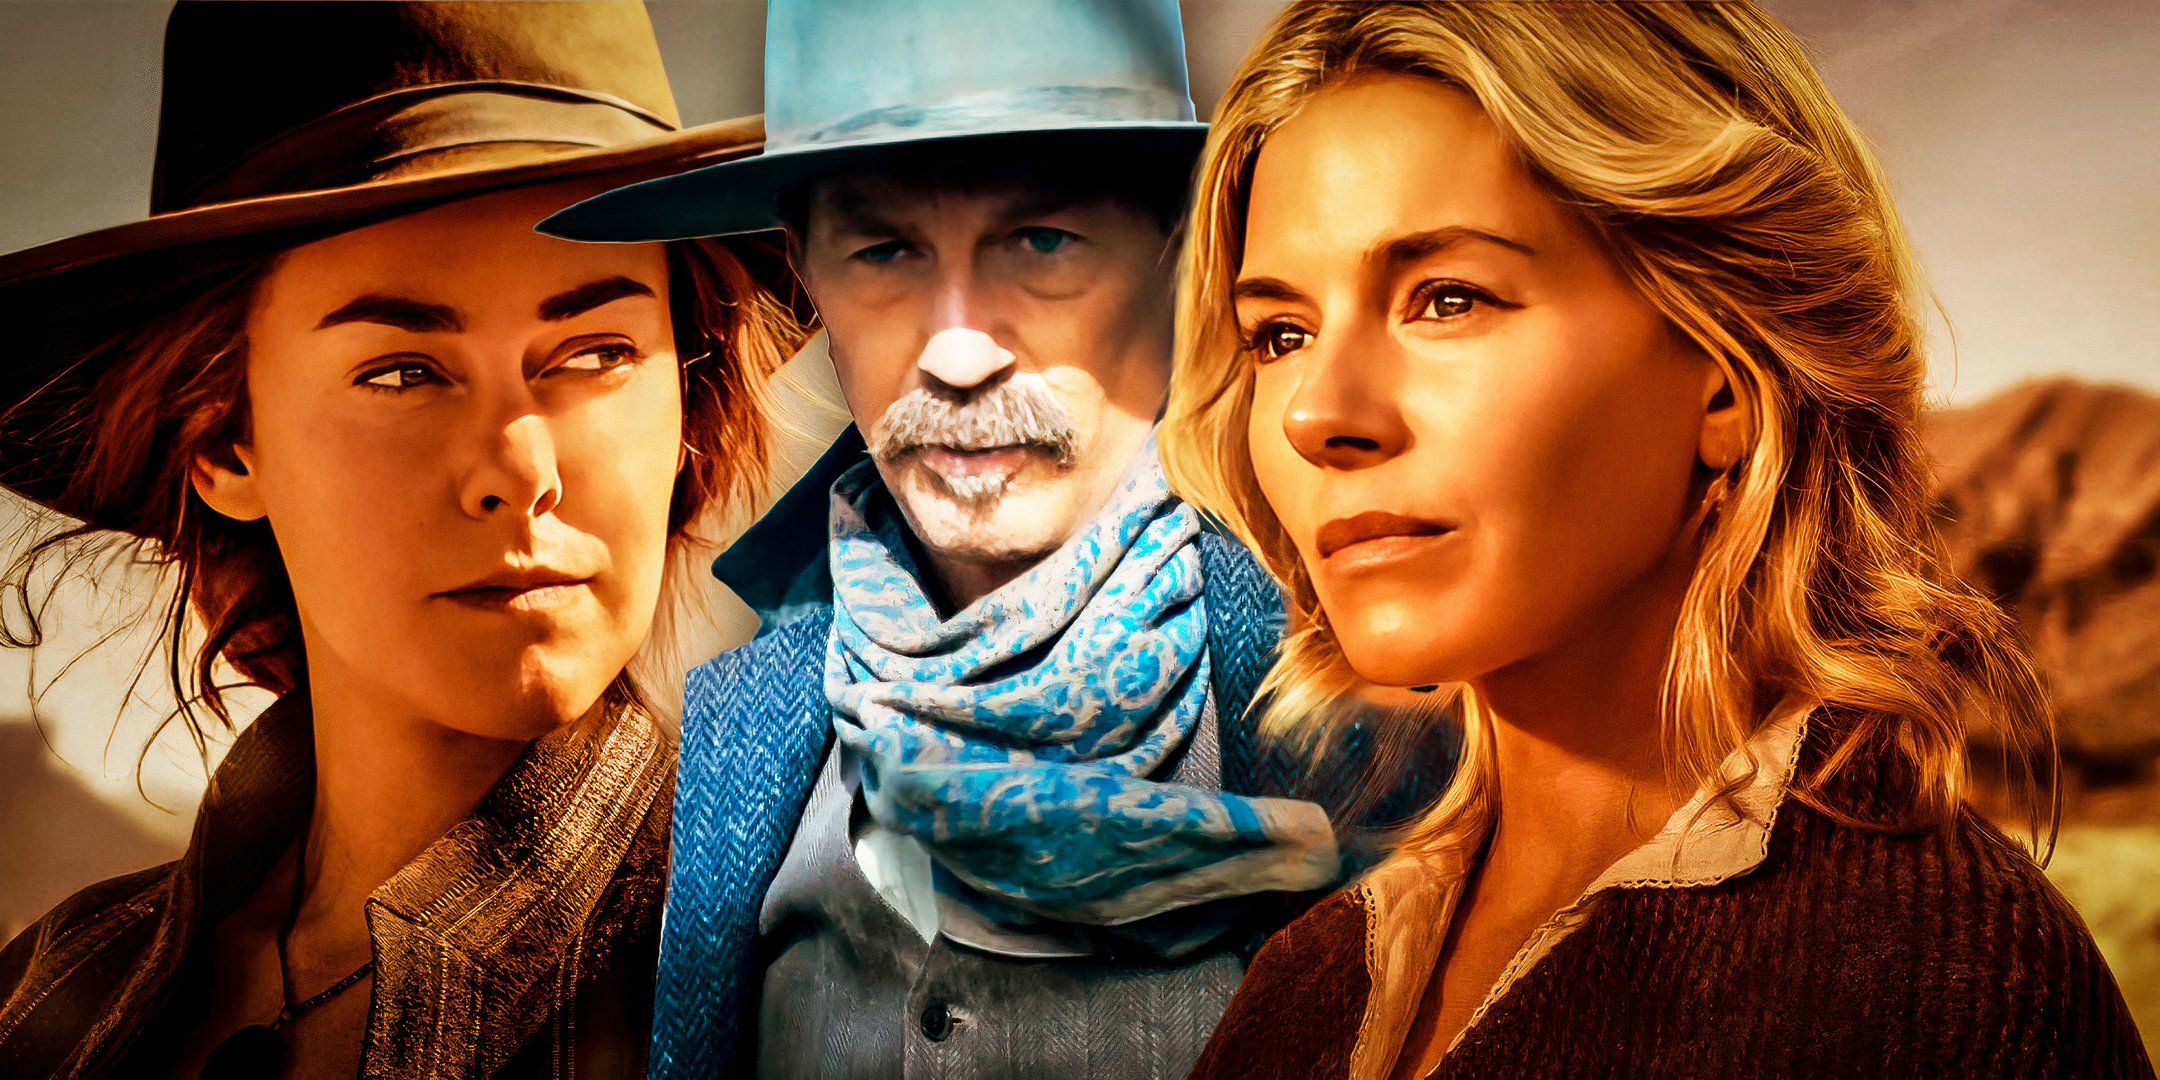 Jena Malone, Kevin Costner, and Sienna Miller in Horizon: An American Saga Chapter 1